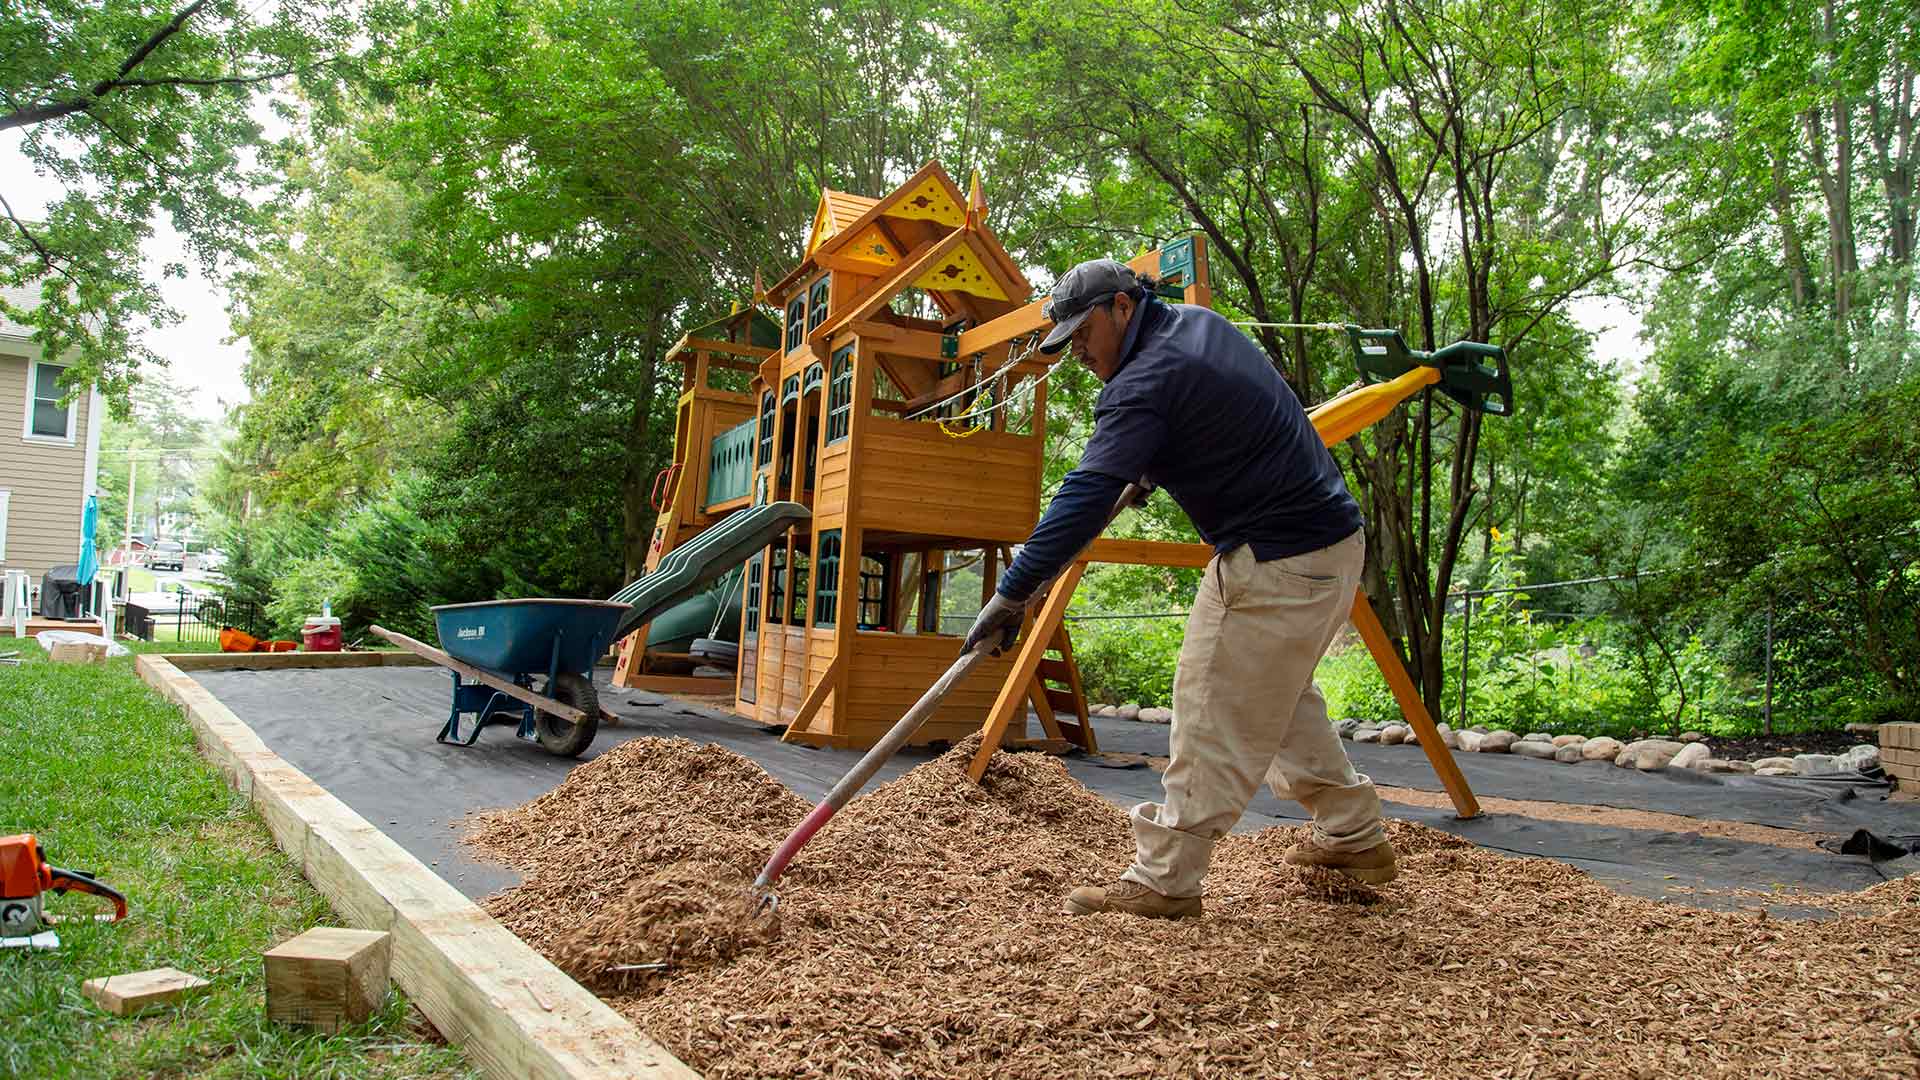 A worker is spreading new mulch around the base of a playground in a backyard in Falls Church, VA.